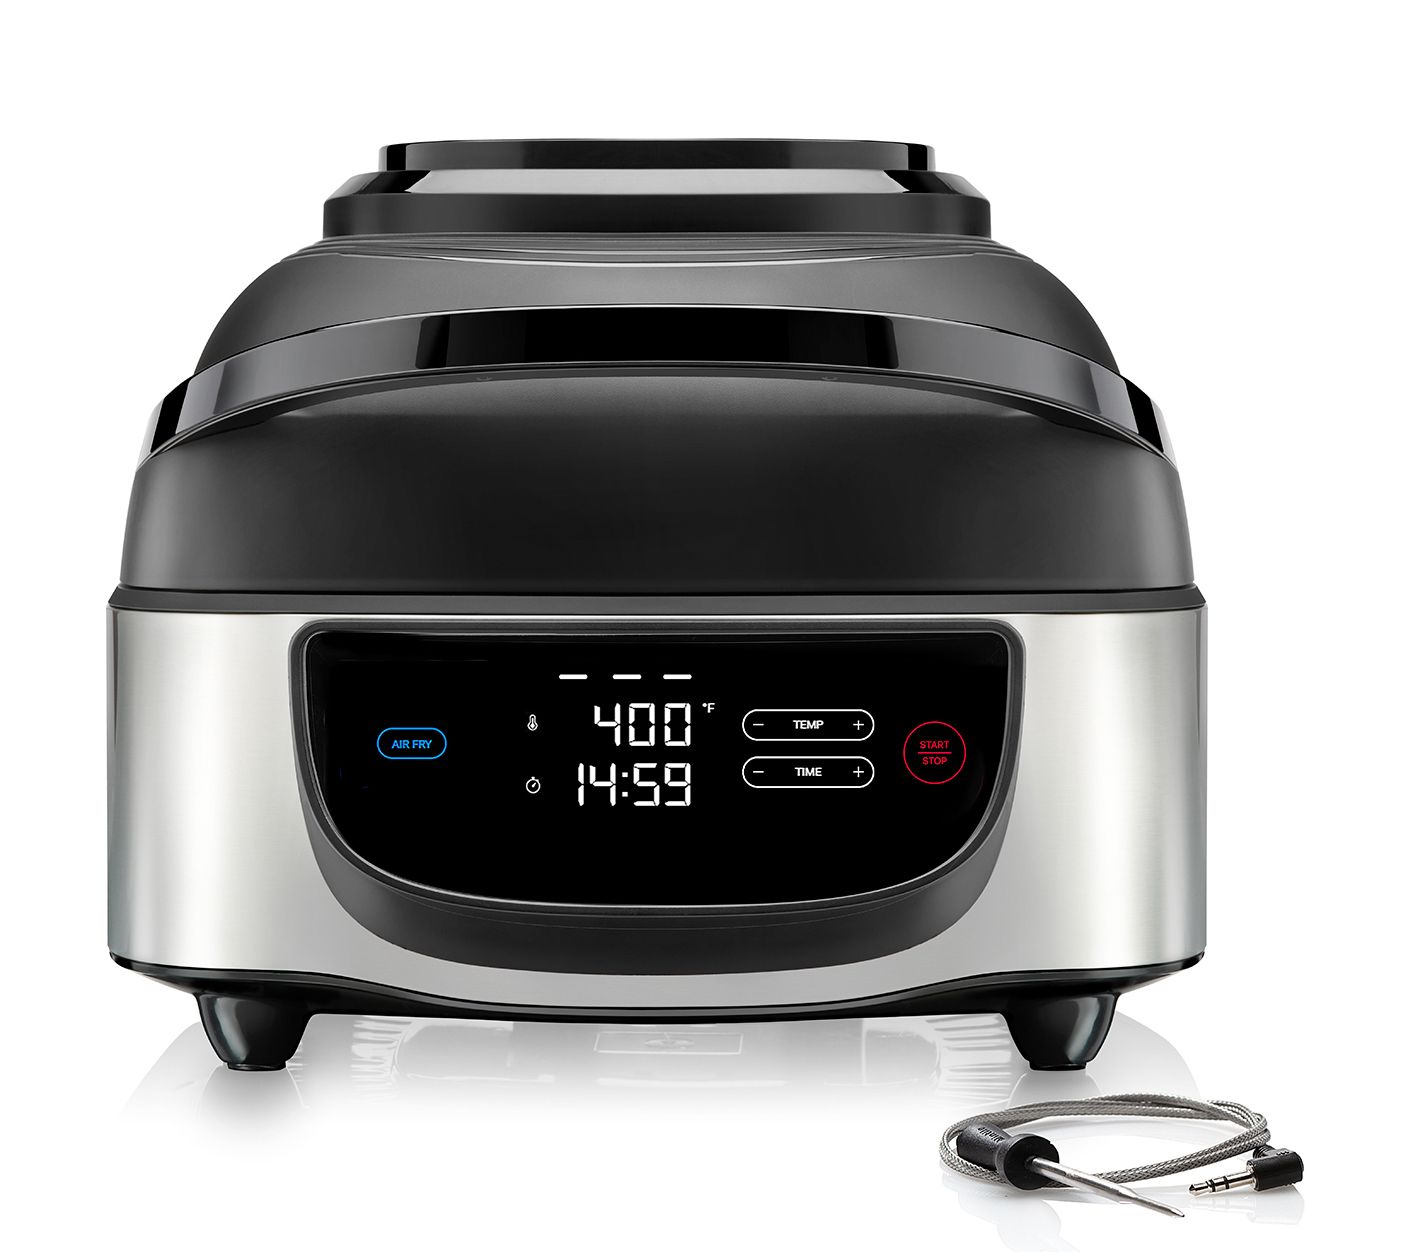  Ninja AG301 Foodi 5-in-1 Indoor Electric Grill with